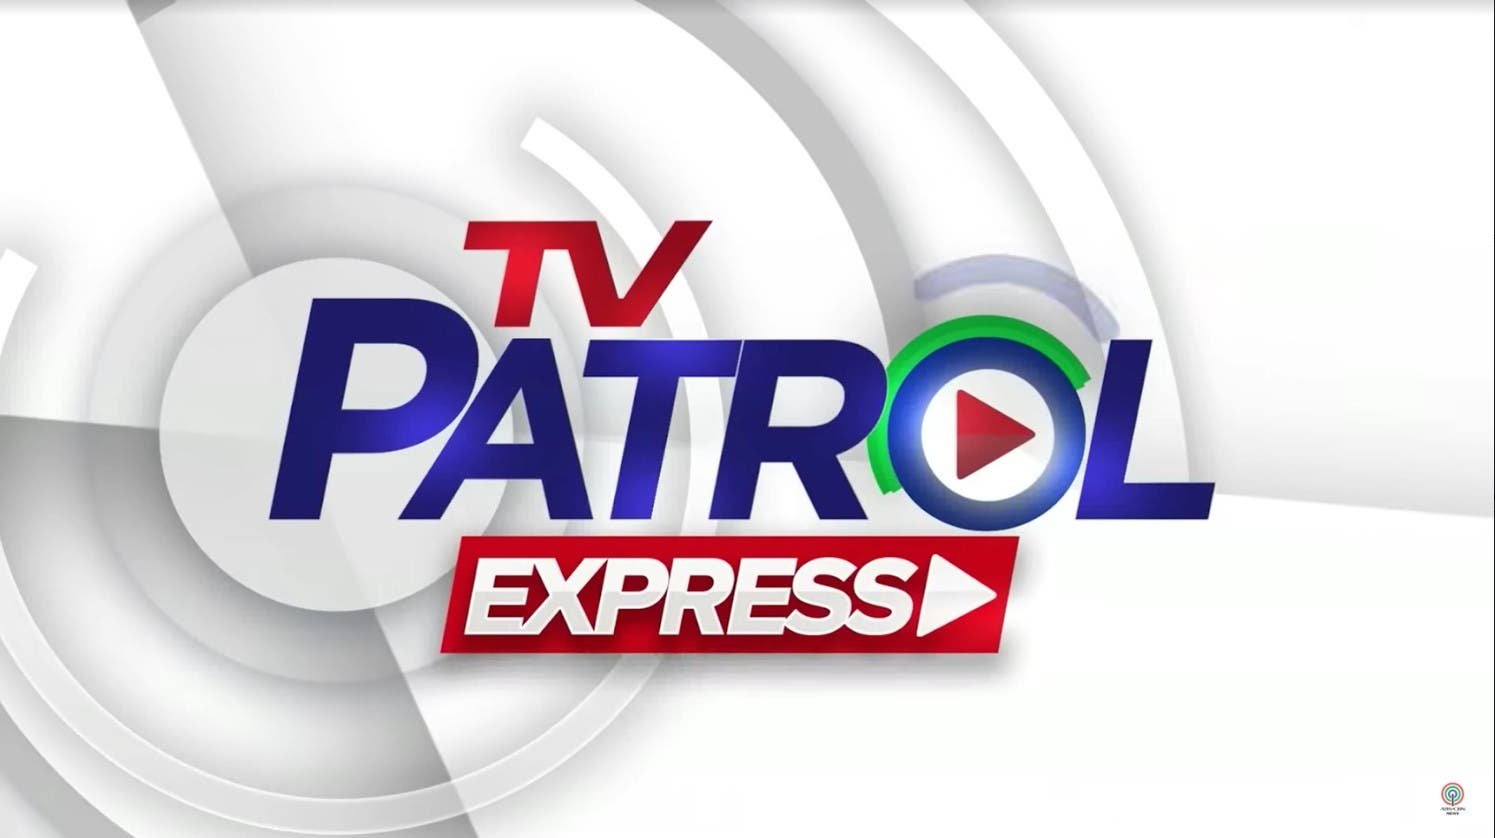 ABS-CBN News Launches Digital-Exclusive ‘TV Patrol Express’ on Facebook and Youtube